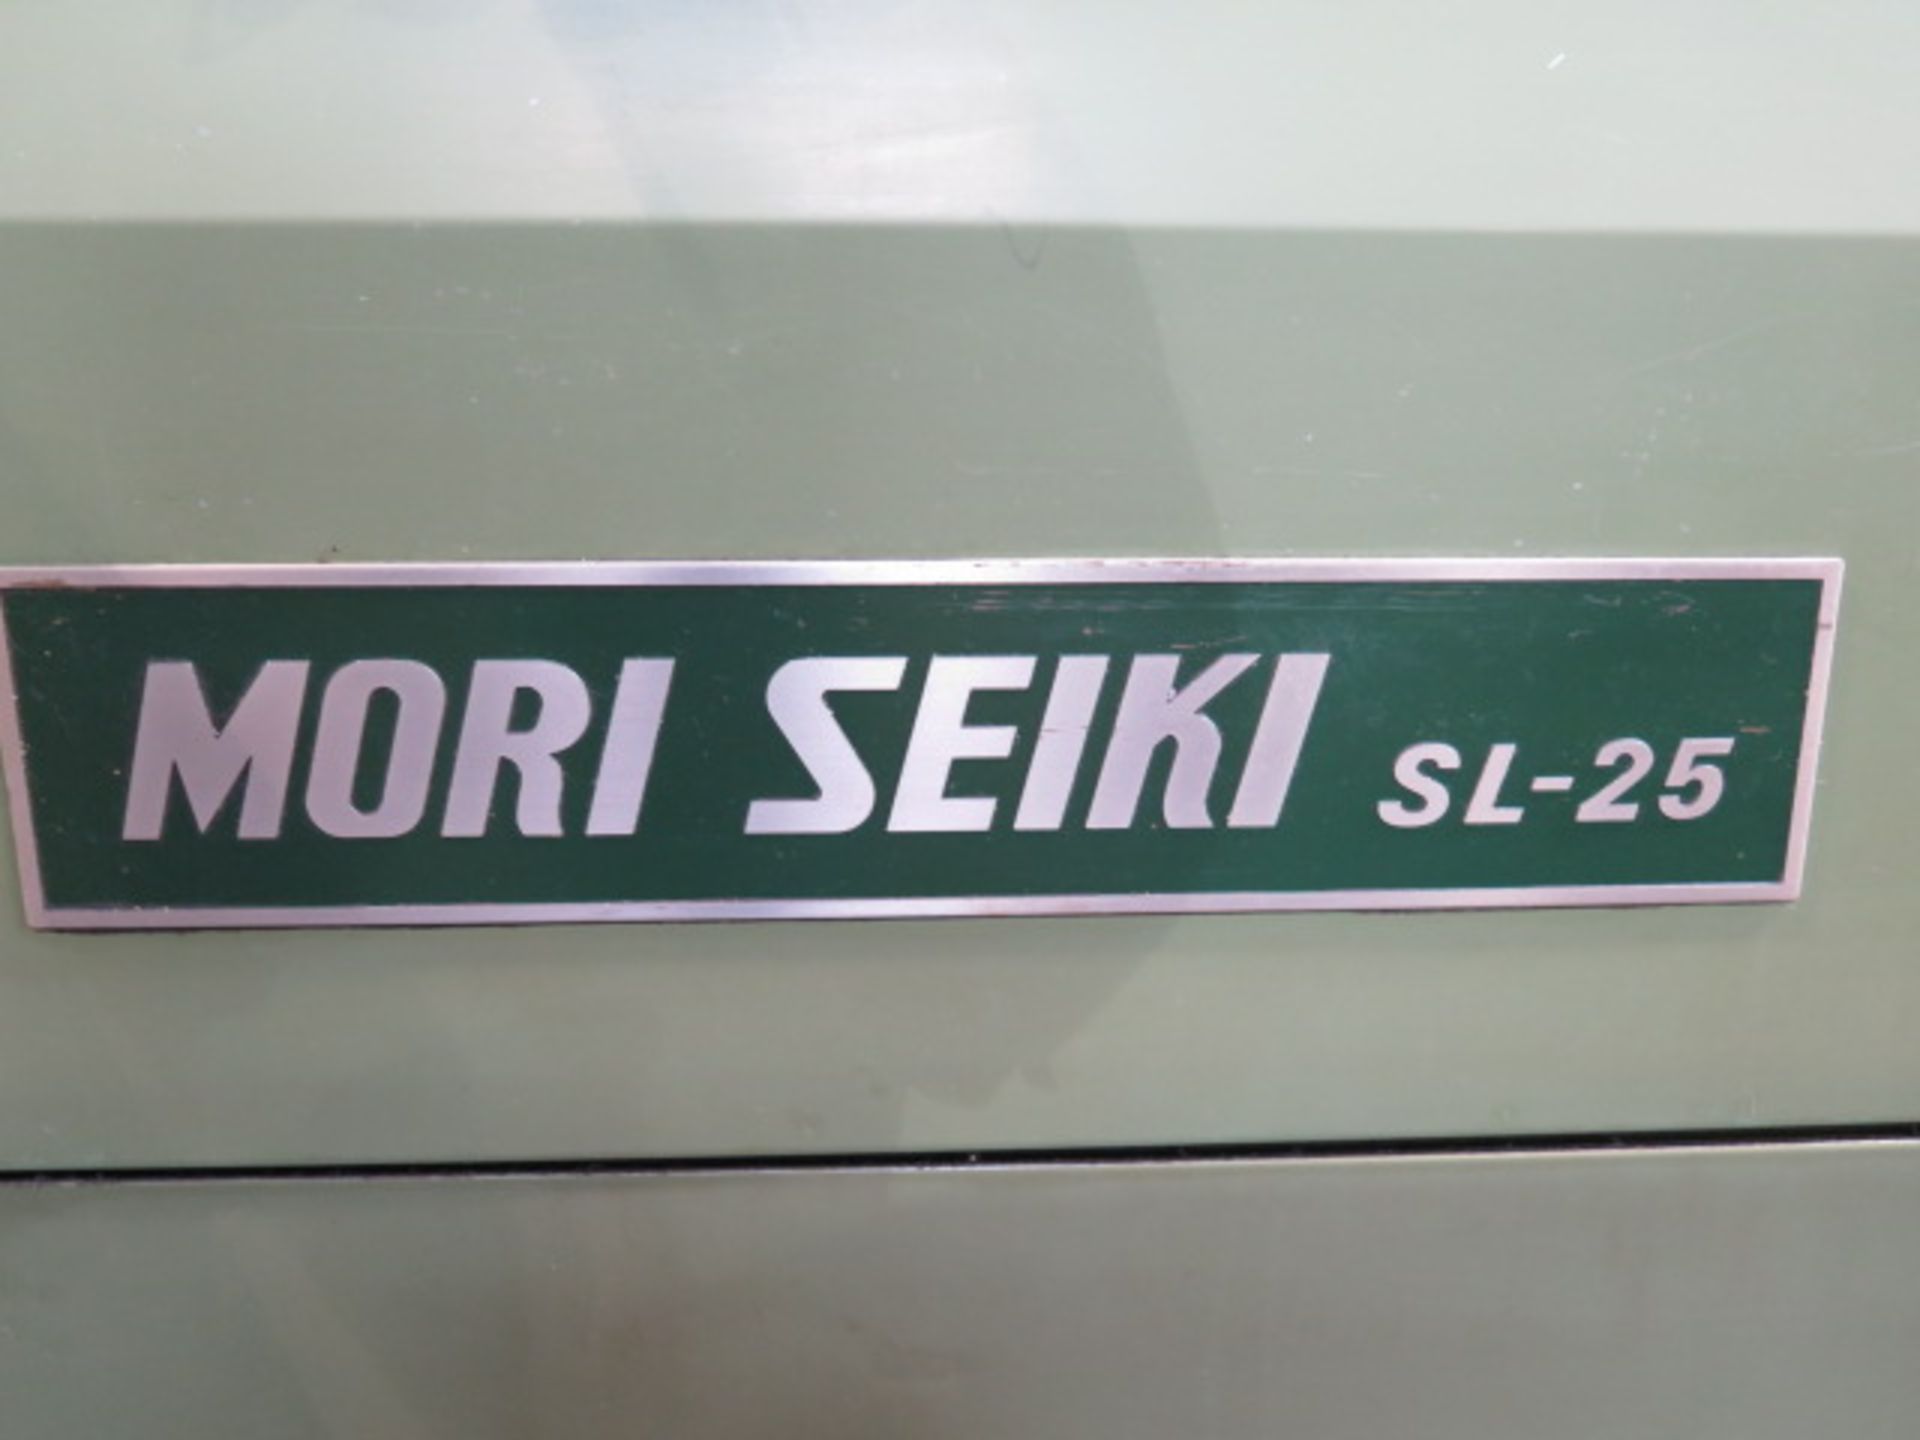 Mori Seiki SL-25 CNC Turning Center s/n 3178 w/ Yasnac Controls, 10-Station, Hydraulic, SOLD AS IS - Image 10 of 11